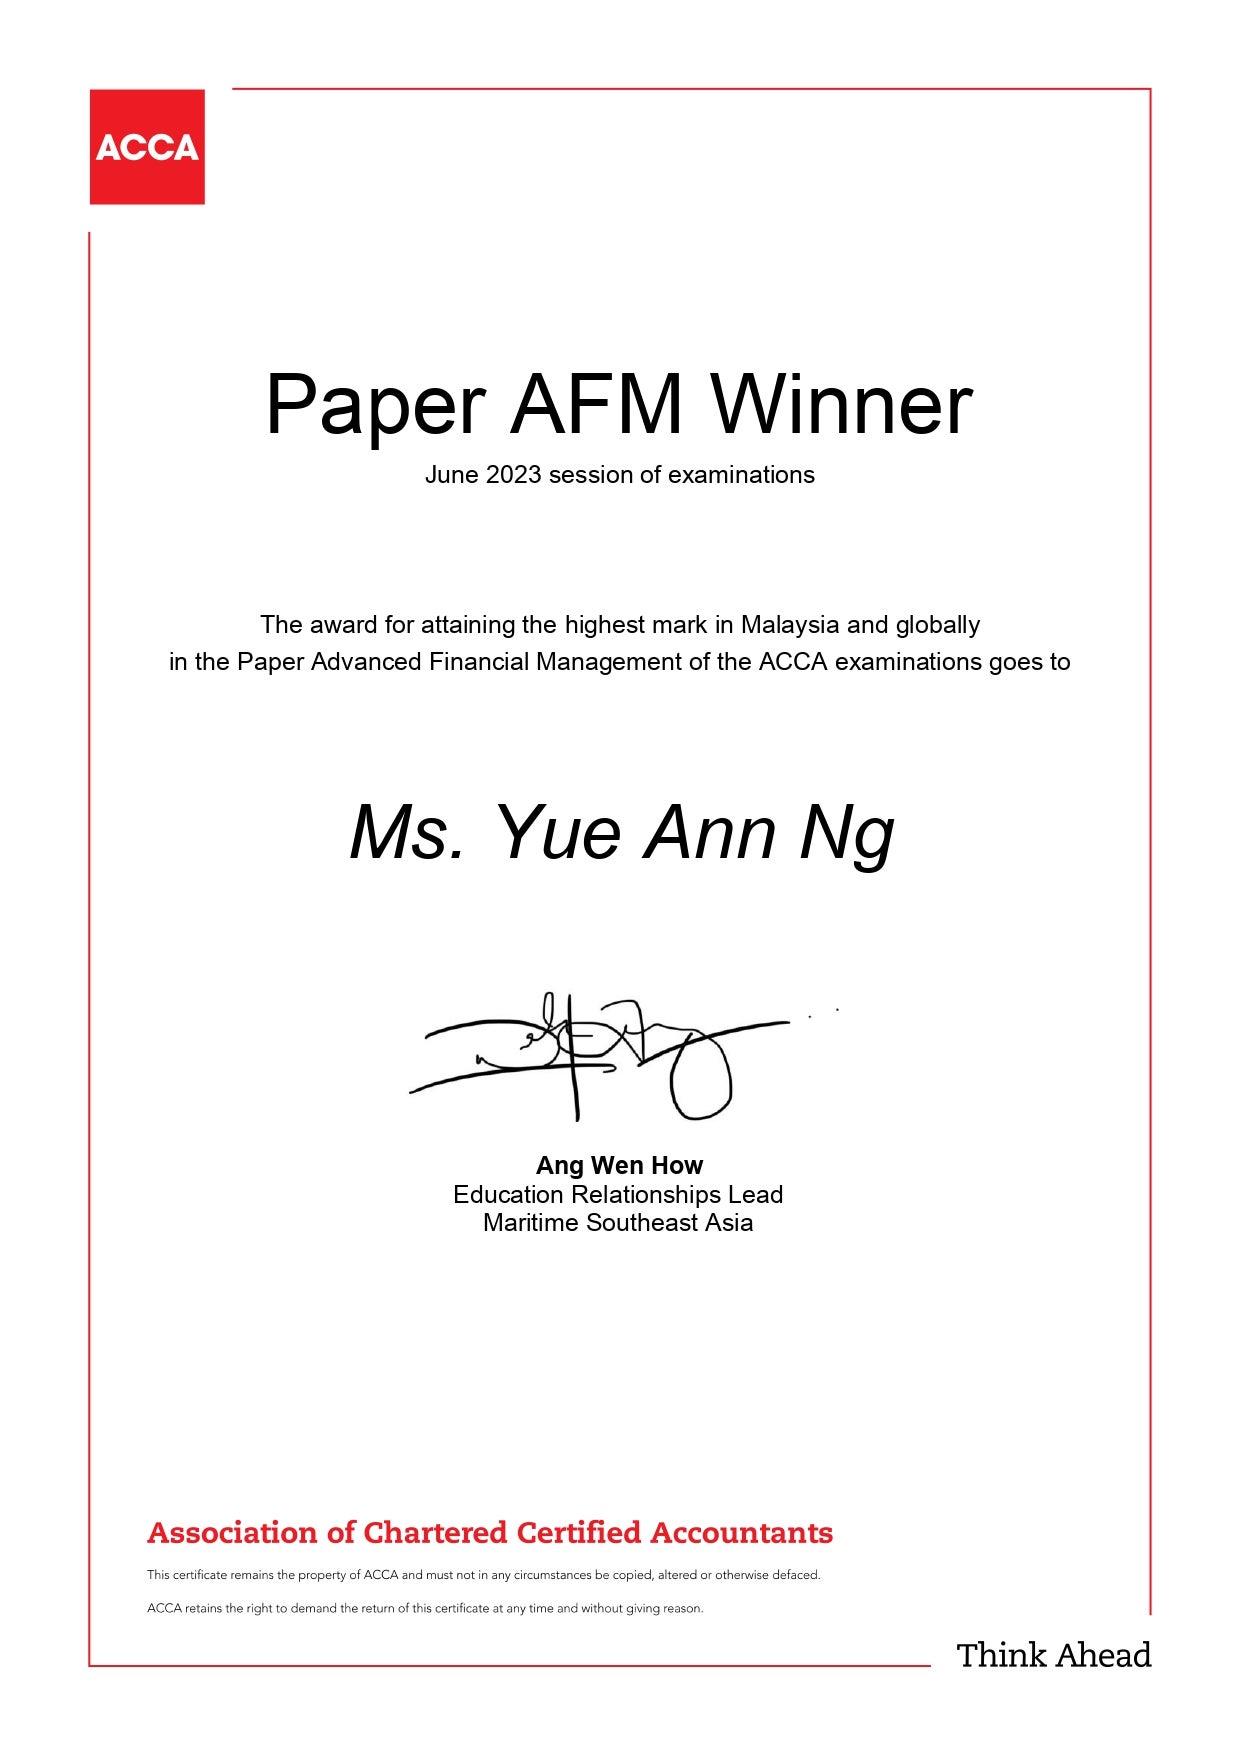 ACCA AFM global and malaysia prizewinner ng yue ann utar congrats certificate